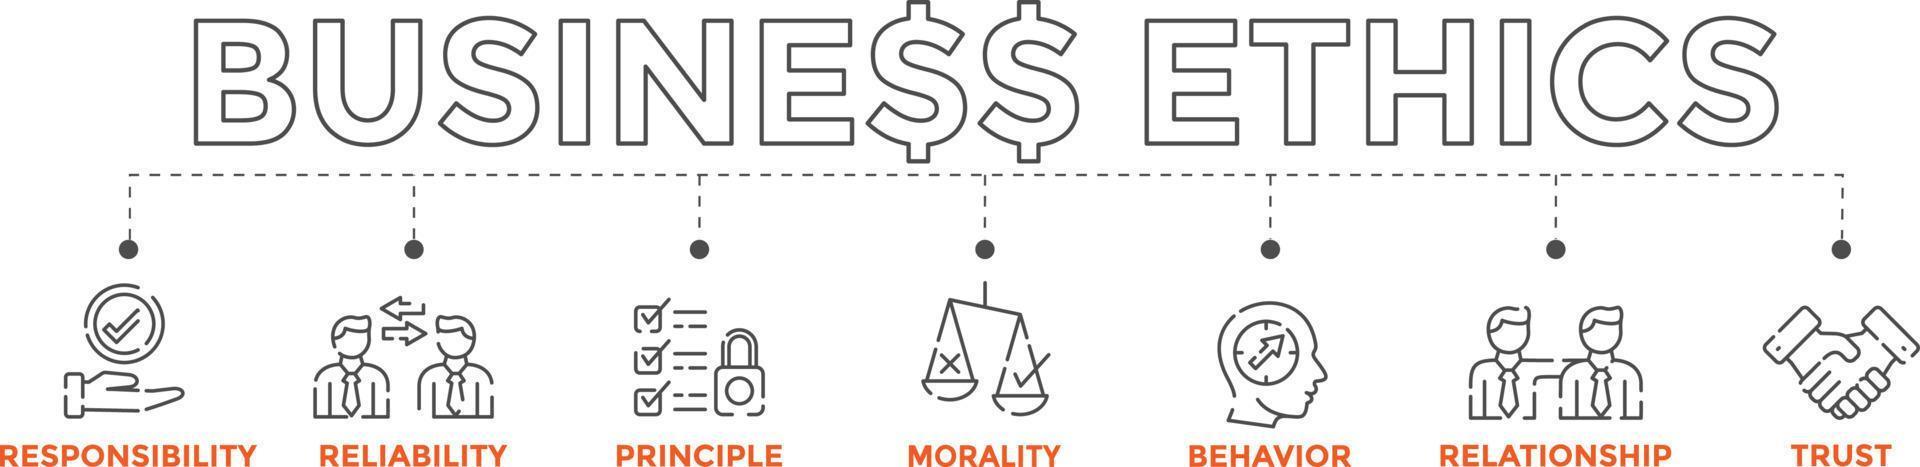 Business ethics concept illustration. Business ethics banner with icons. vector